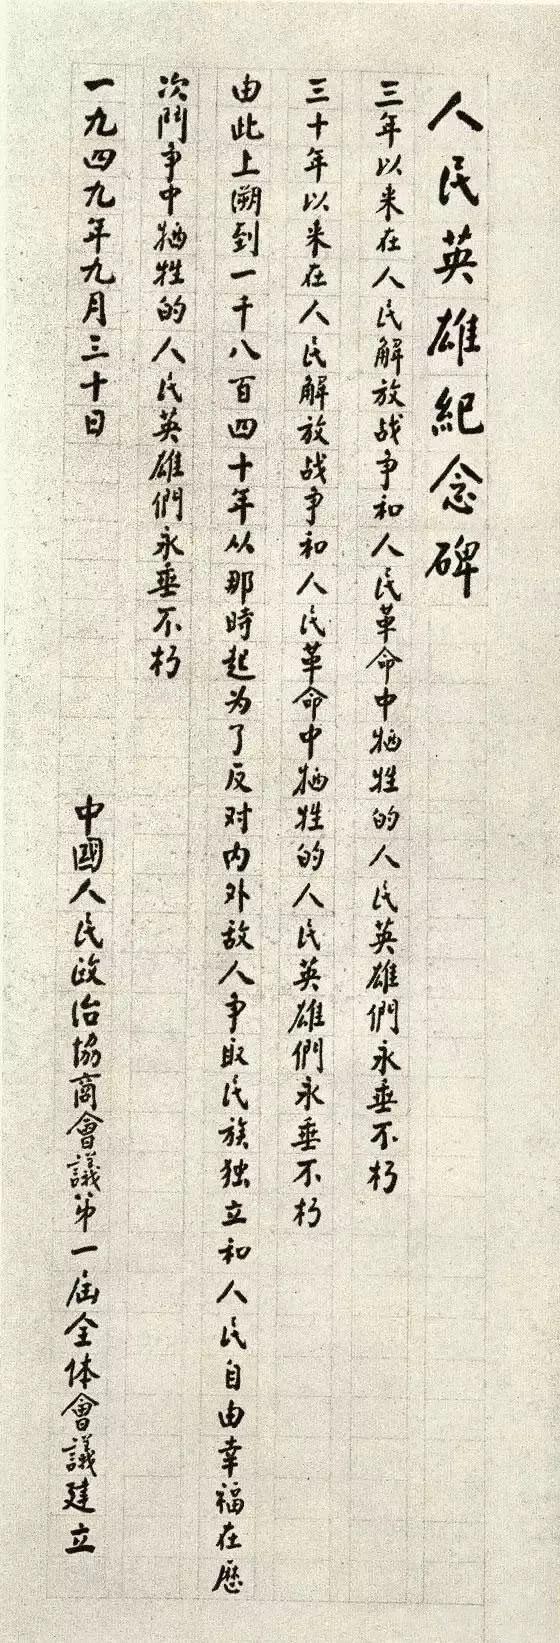 People hero commemorates epitaph only 150 words, premier Zhou wrote ability final version 41 times, word word gem